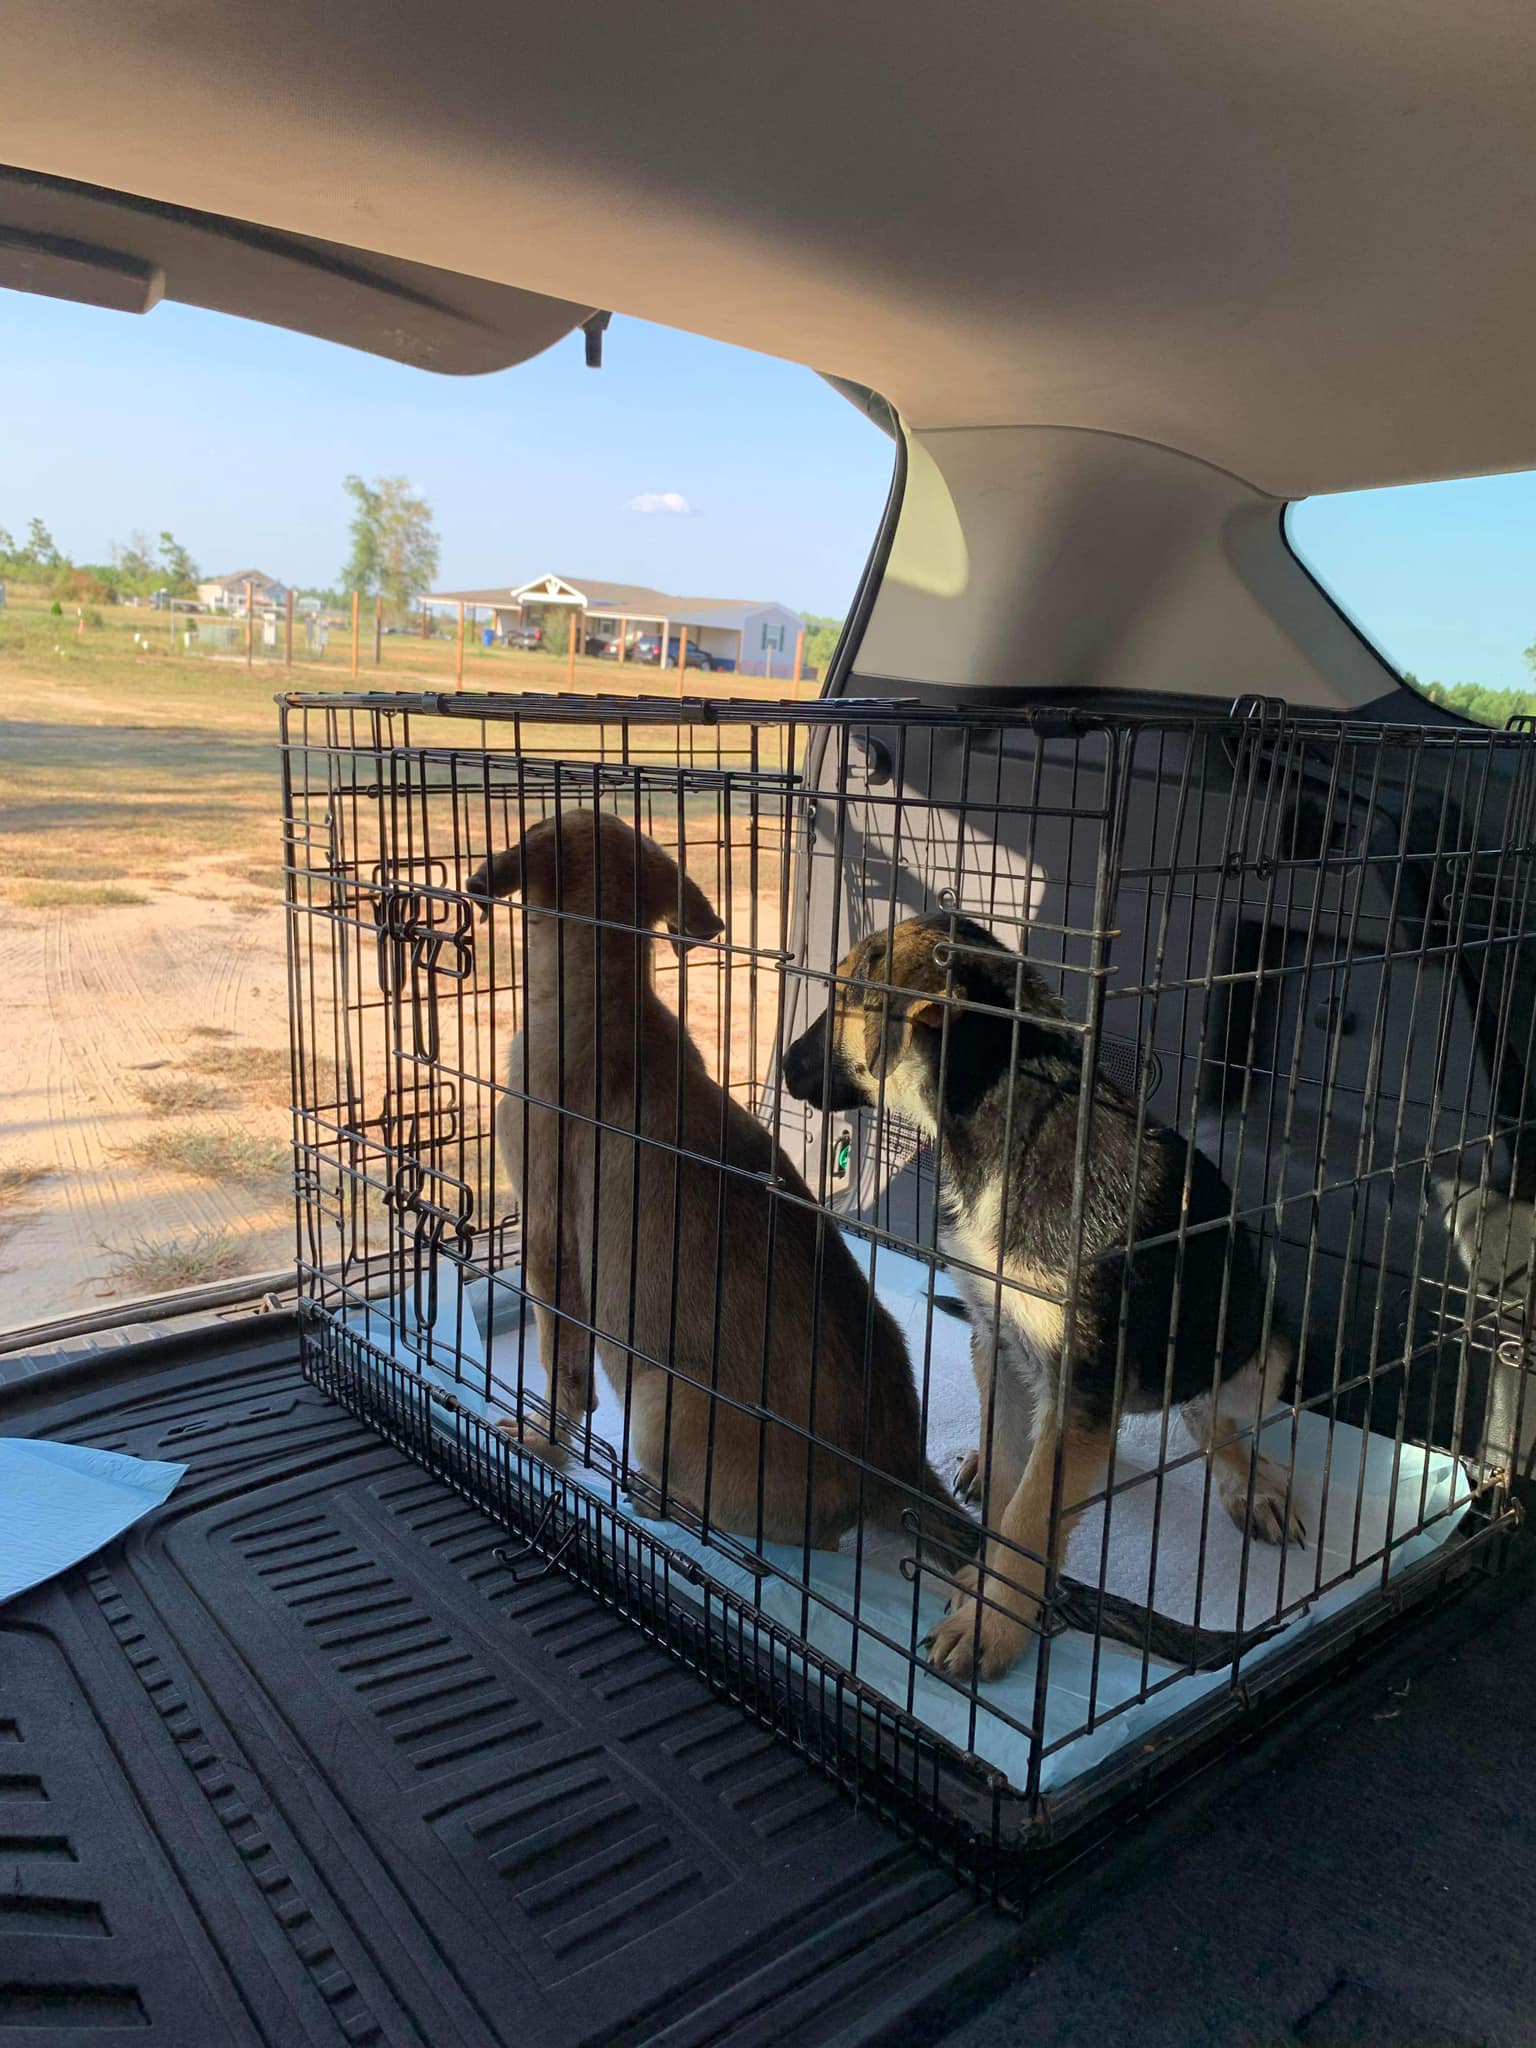 puppies in a cage in the car